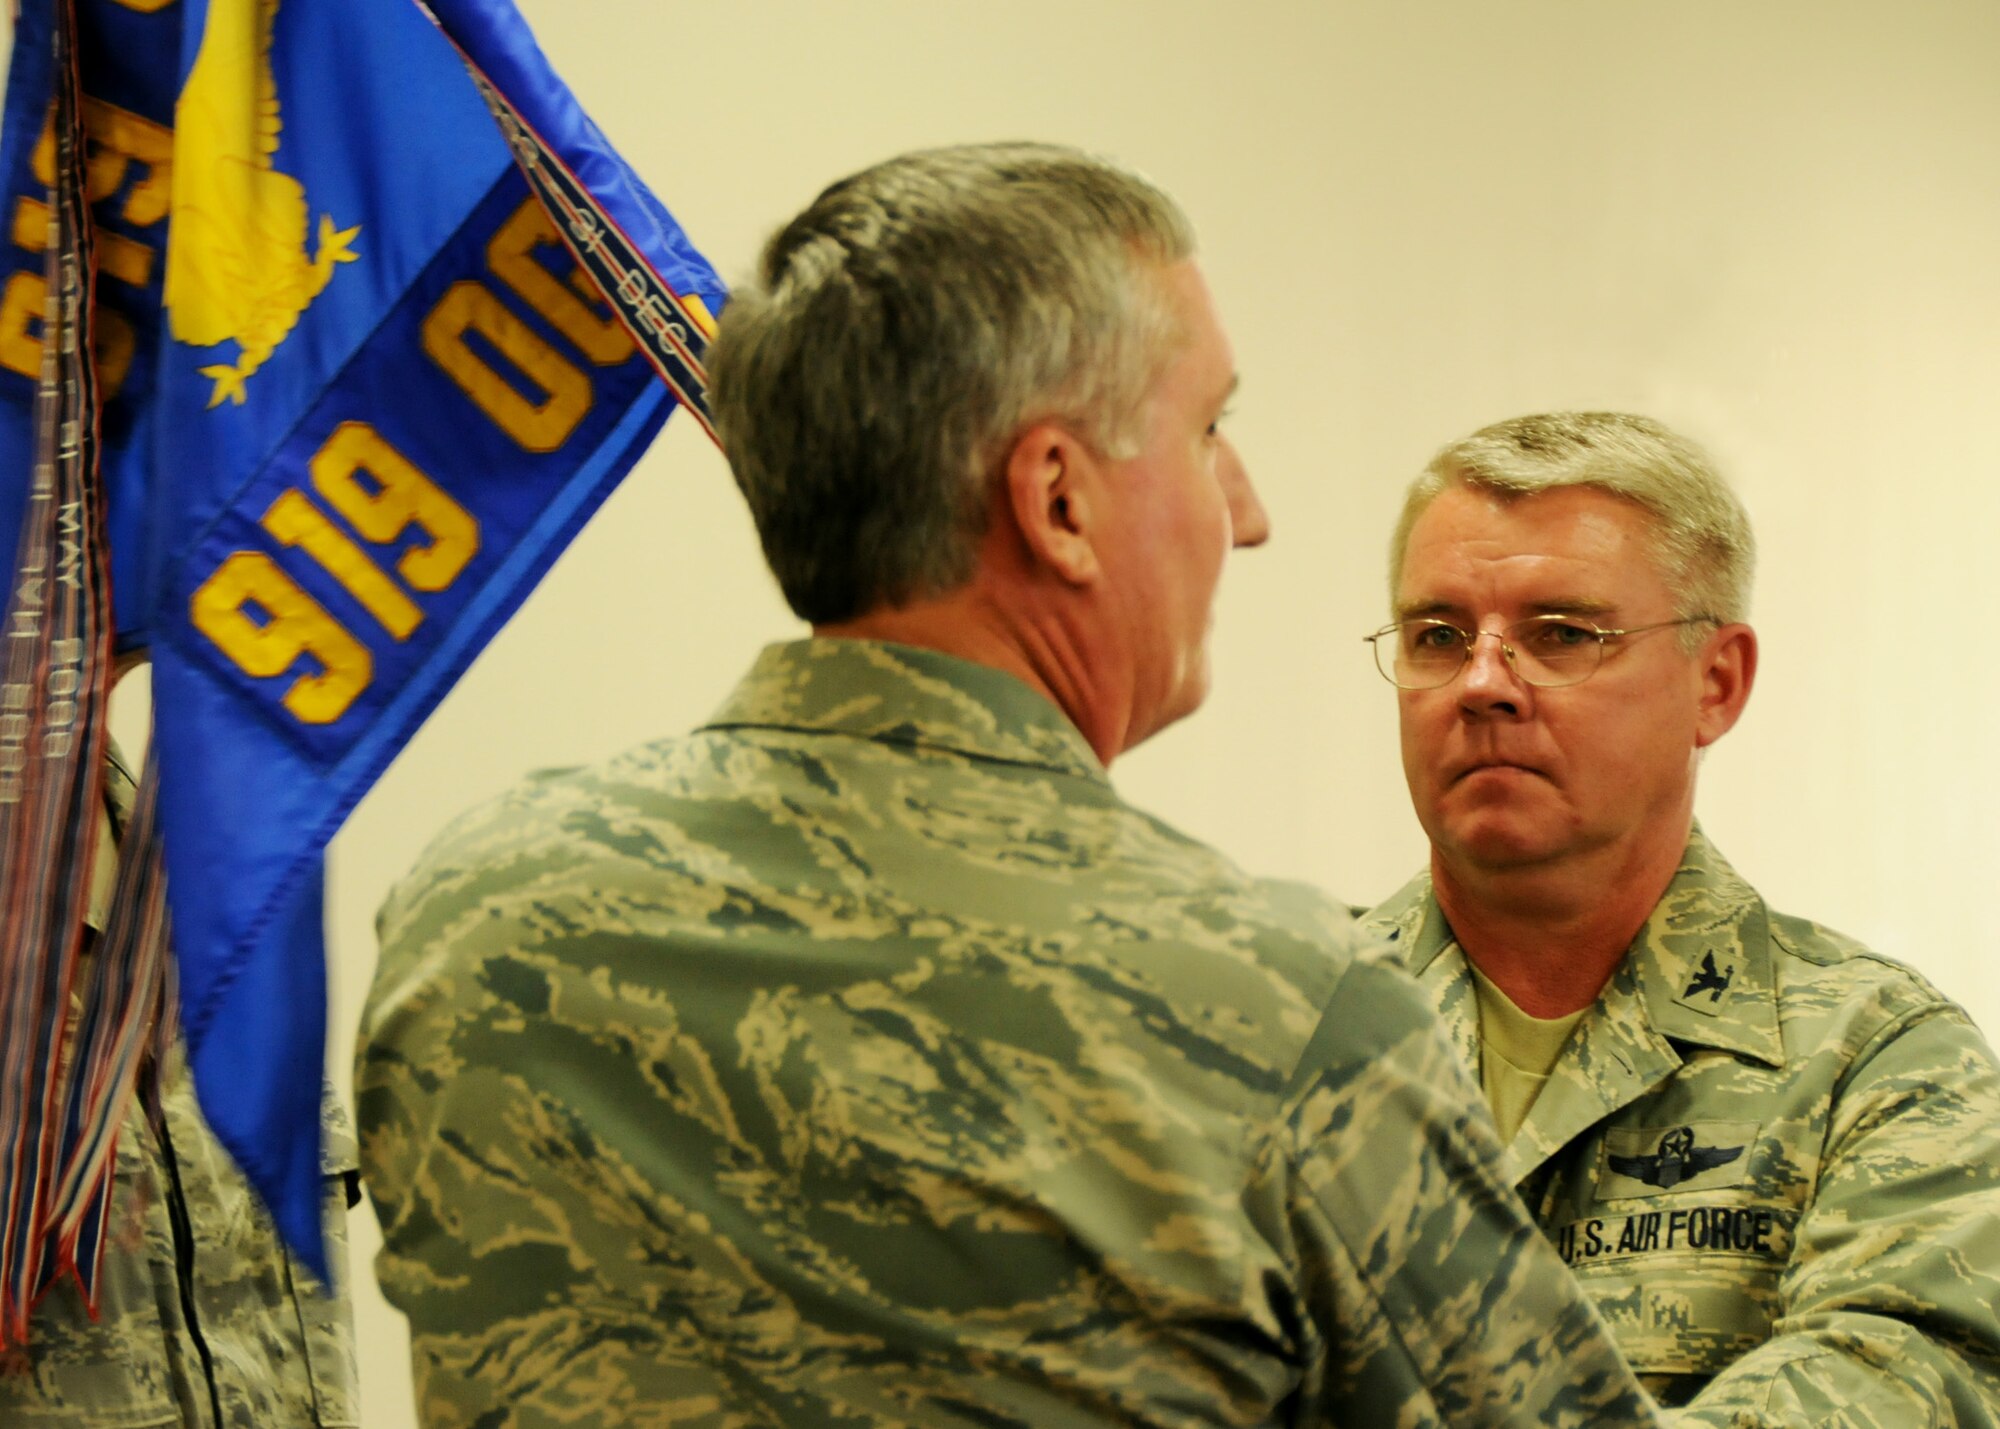 Col. Donald Buckley (right) receives the 919th Operations Group guidon from Col. Jon Weeks, 919th Special Operations Wing commander, during Colonel Buckley's assumption of command ceremony April 10 at Duke Field.   As the new 919th OG commander, Colonel Buckley reports to the wing commander on all operational matters for Reserve squadrons operating Air Force Reserve Command-owned MC-130E Combat Talon I aircraft, active-duty-owned U-28 aircraft and MQ-1 Predator remotely piloted aircraft. (U.S. Air Force photo/Tech. Sgt. Samuel King Jr.)